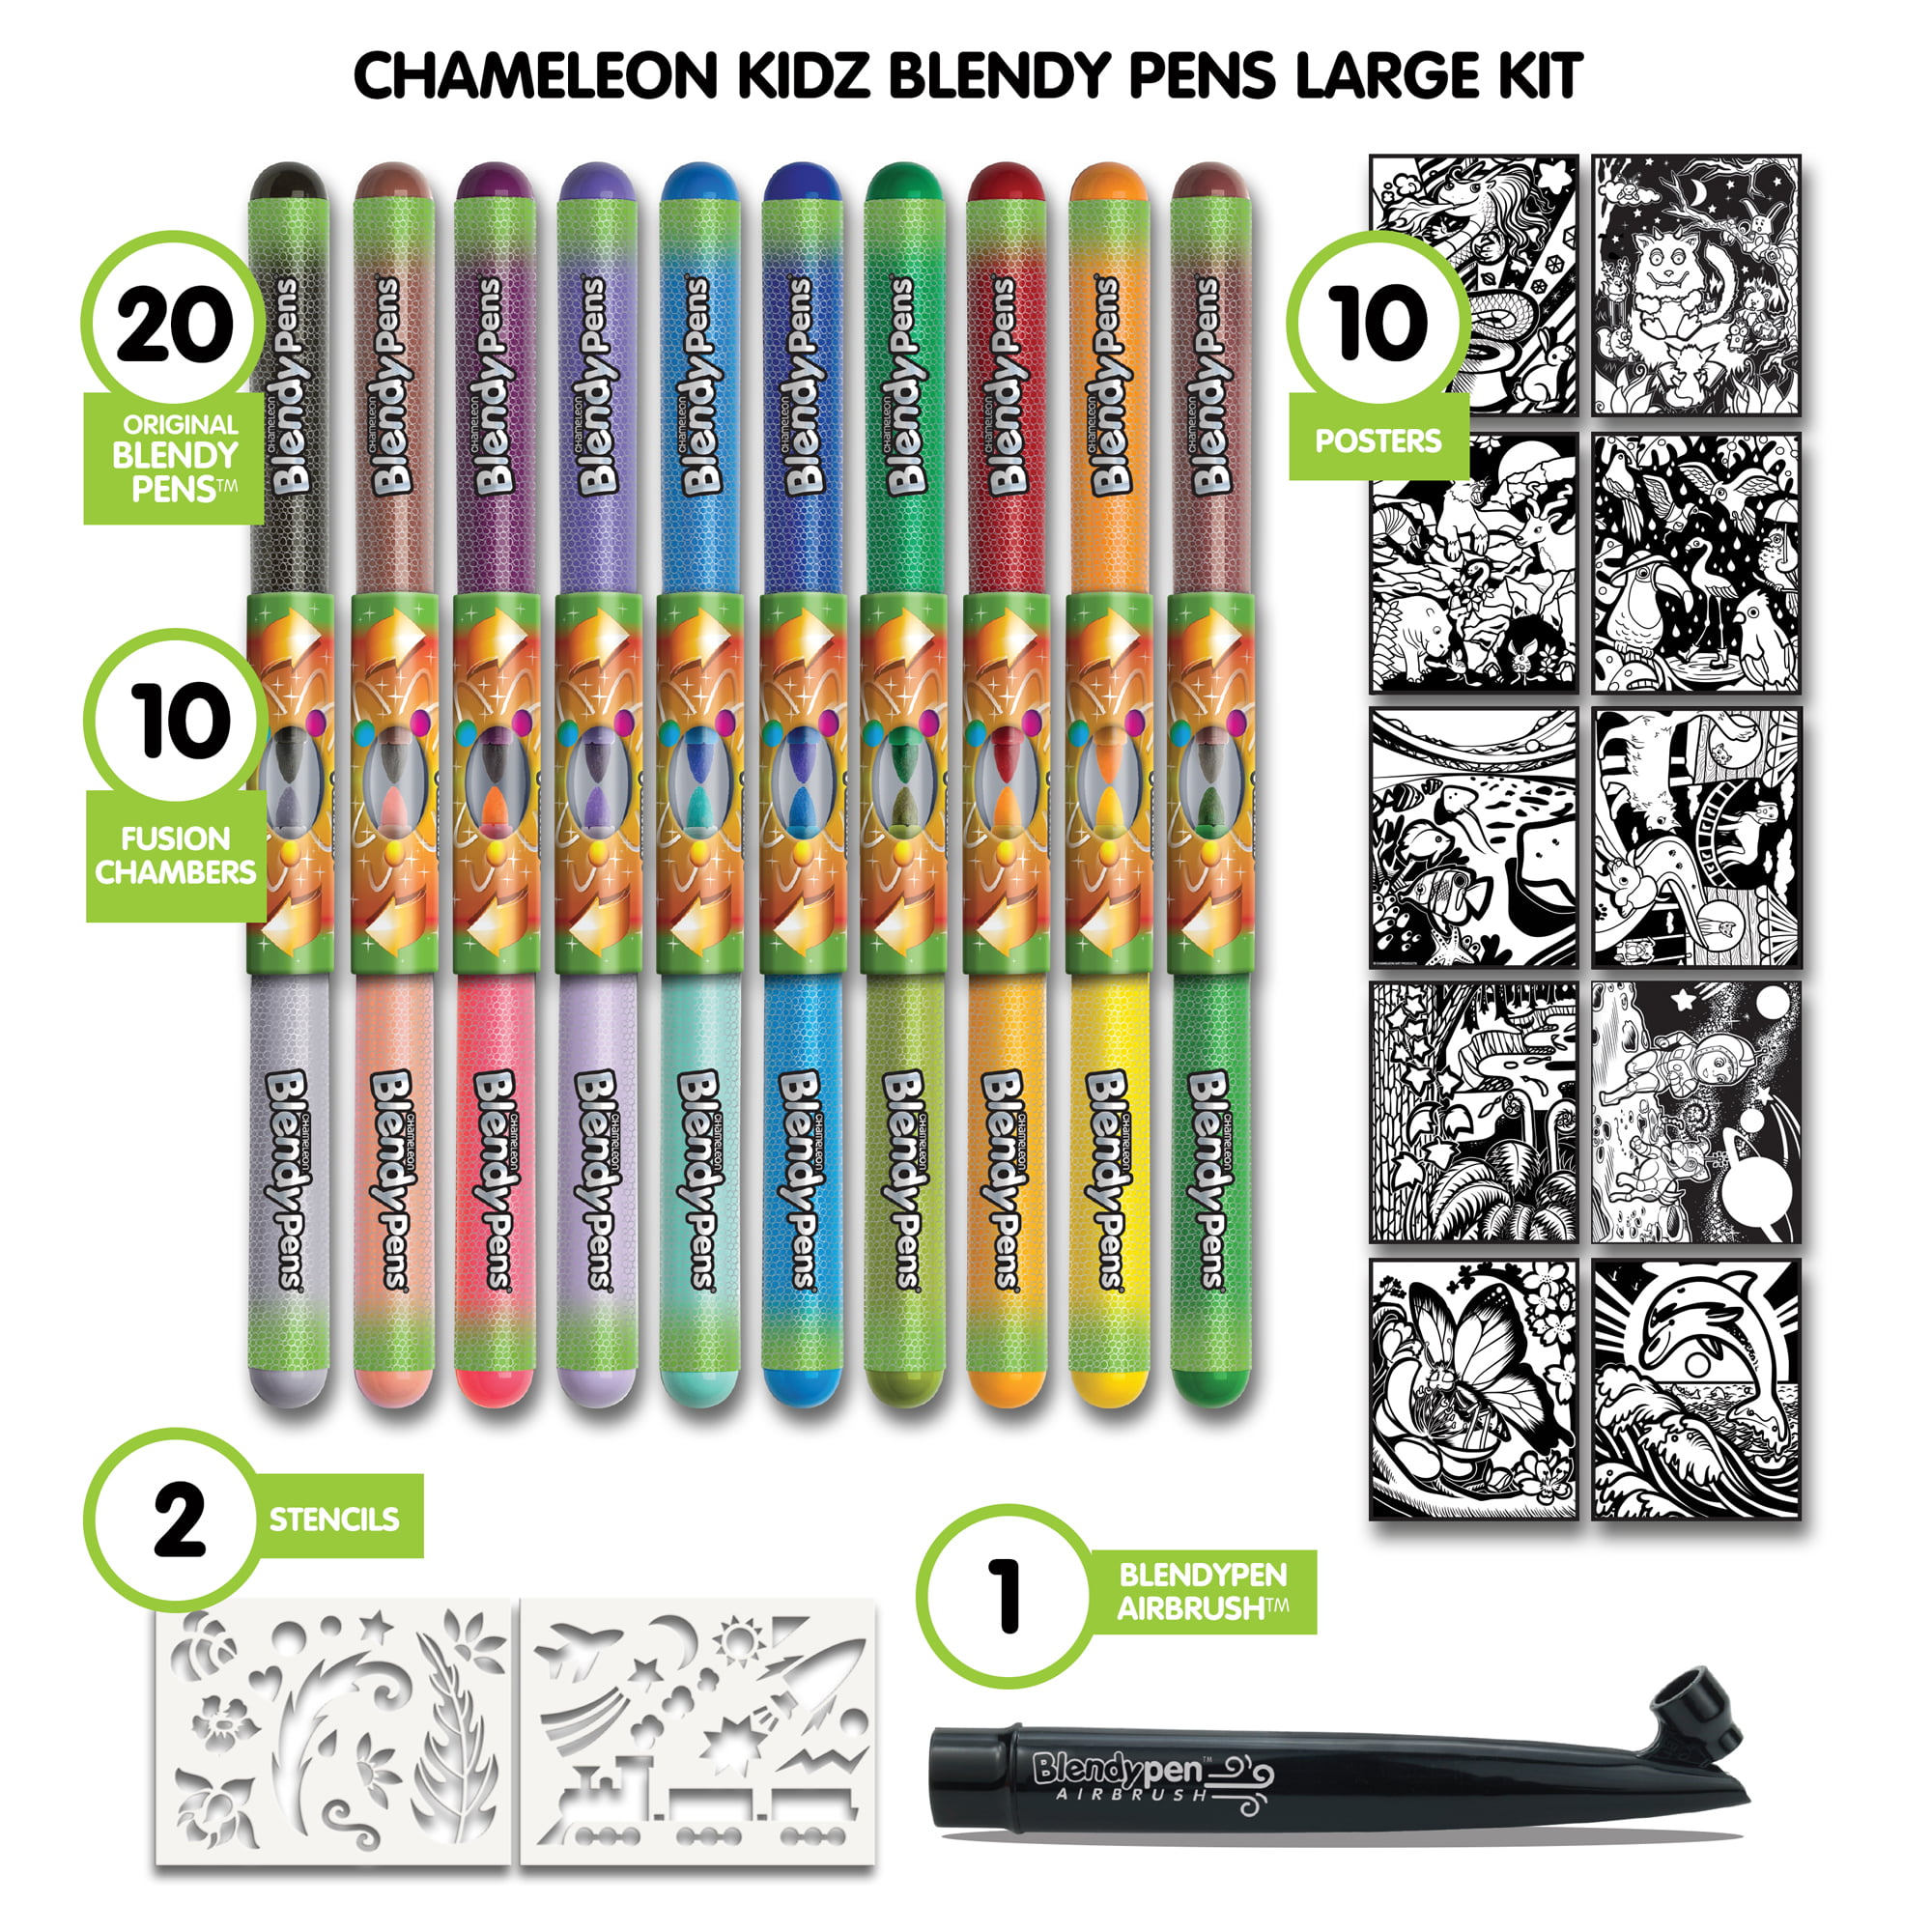 Chameleon Pens and Blendy Pens Make the Perfect Holiday Gift